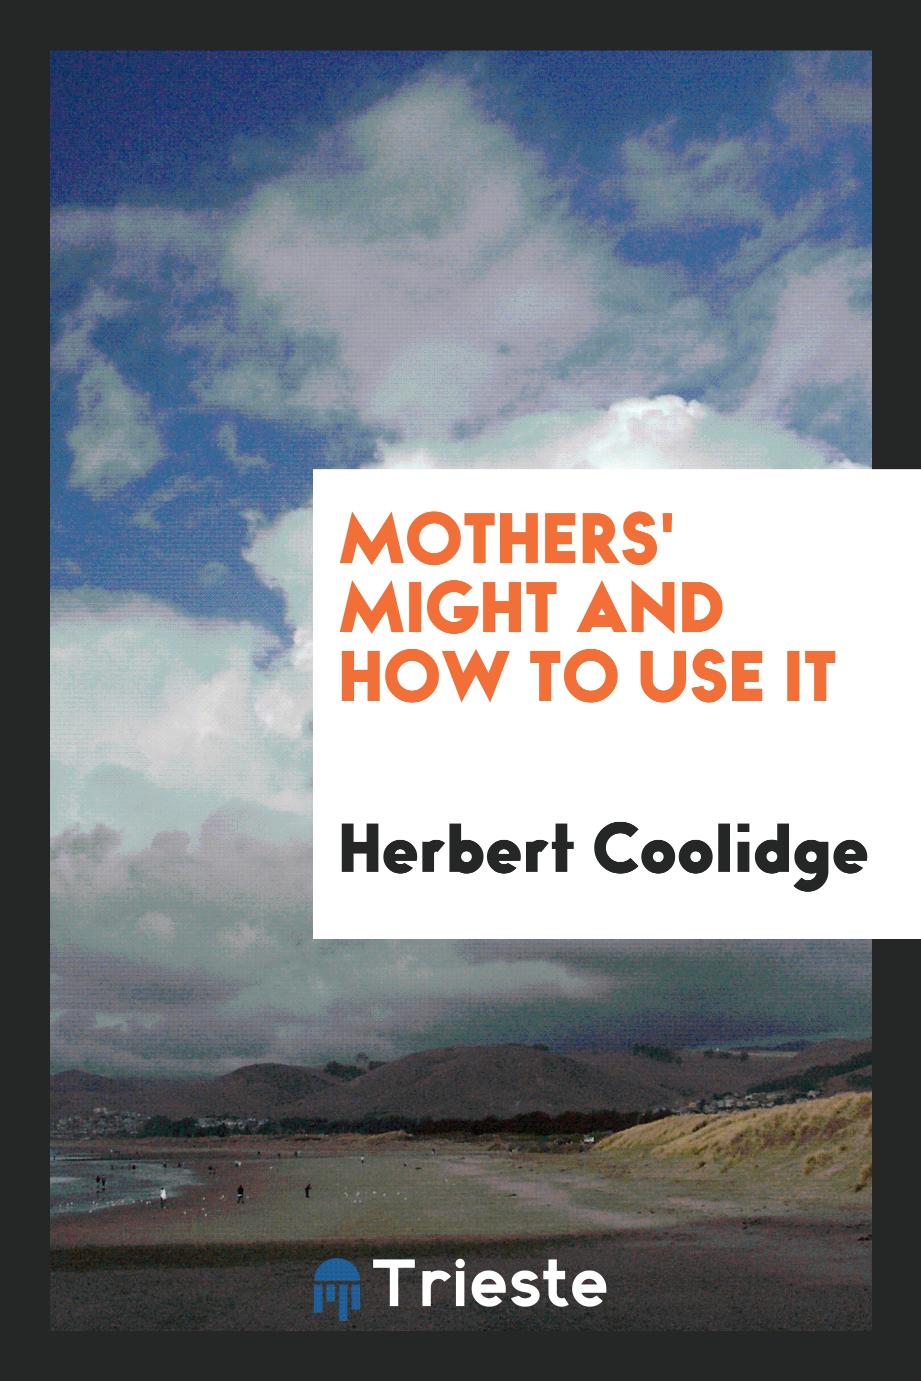 Mothers' Might and How to Use It